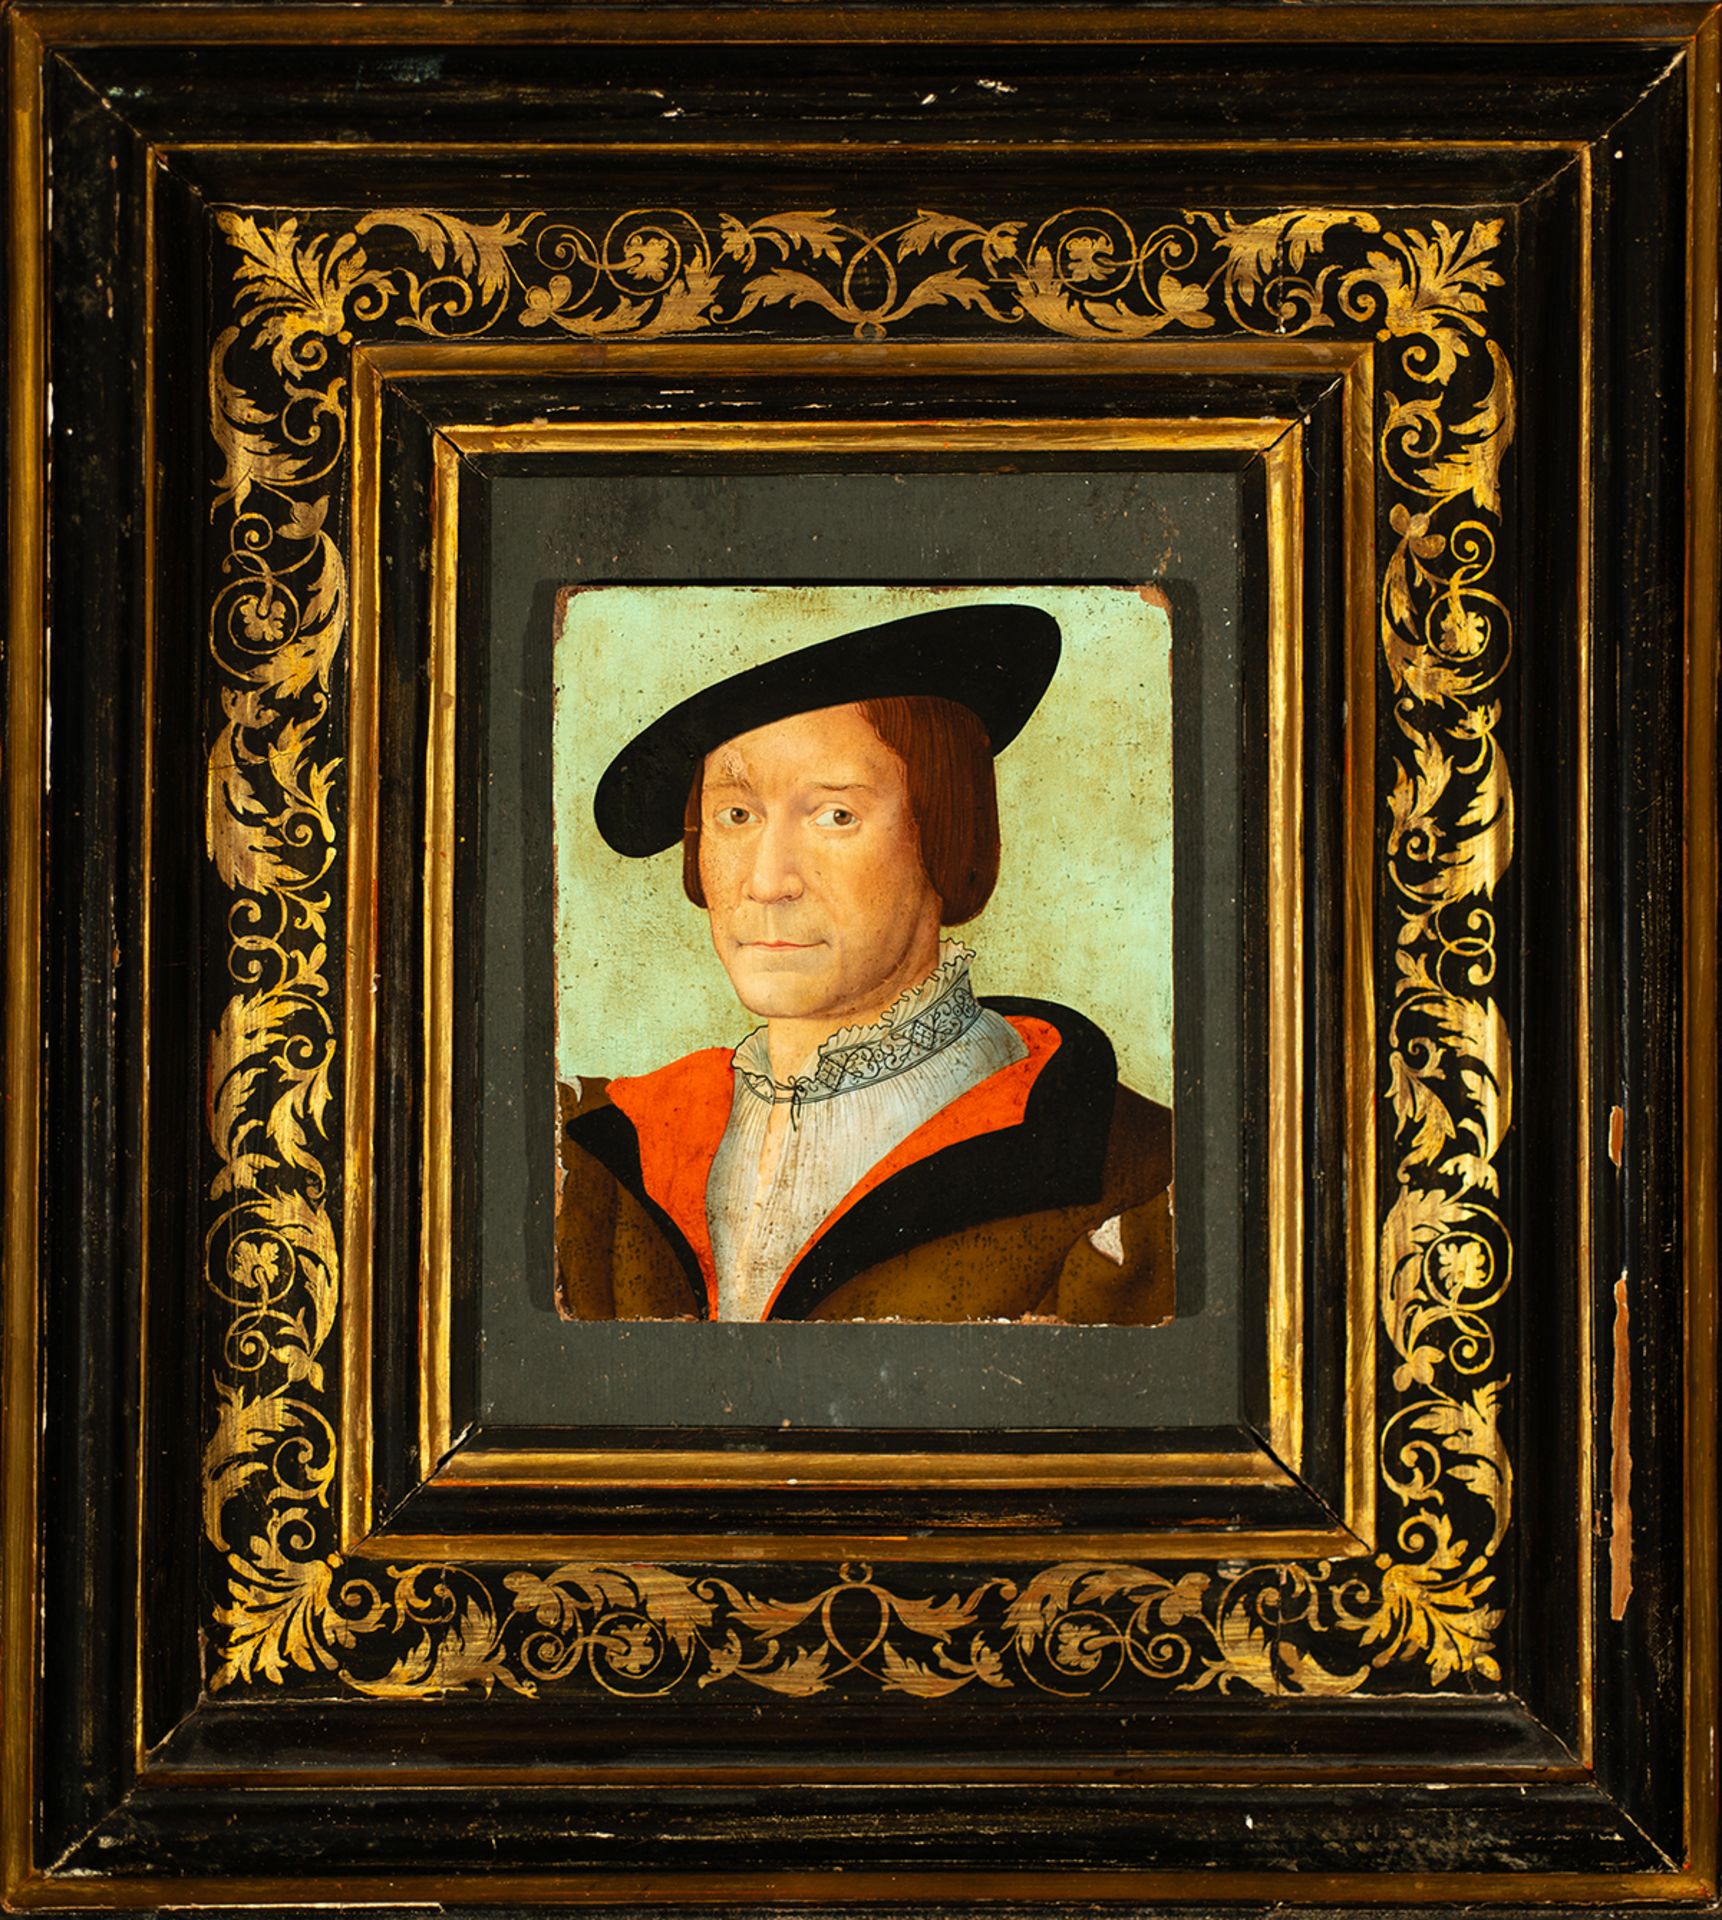 Portrait of a renaissance gentleman, possibly Northern Italian school of the 15th C